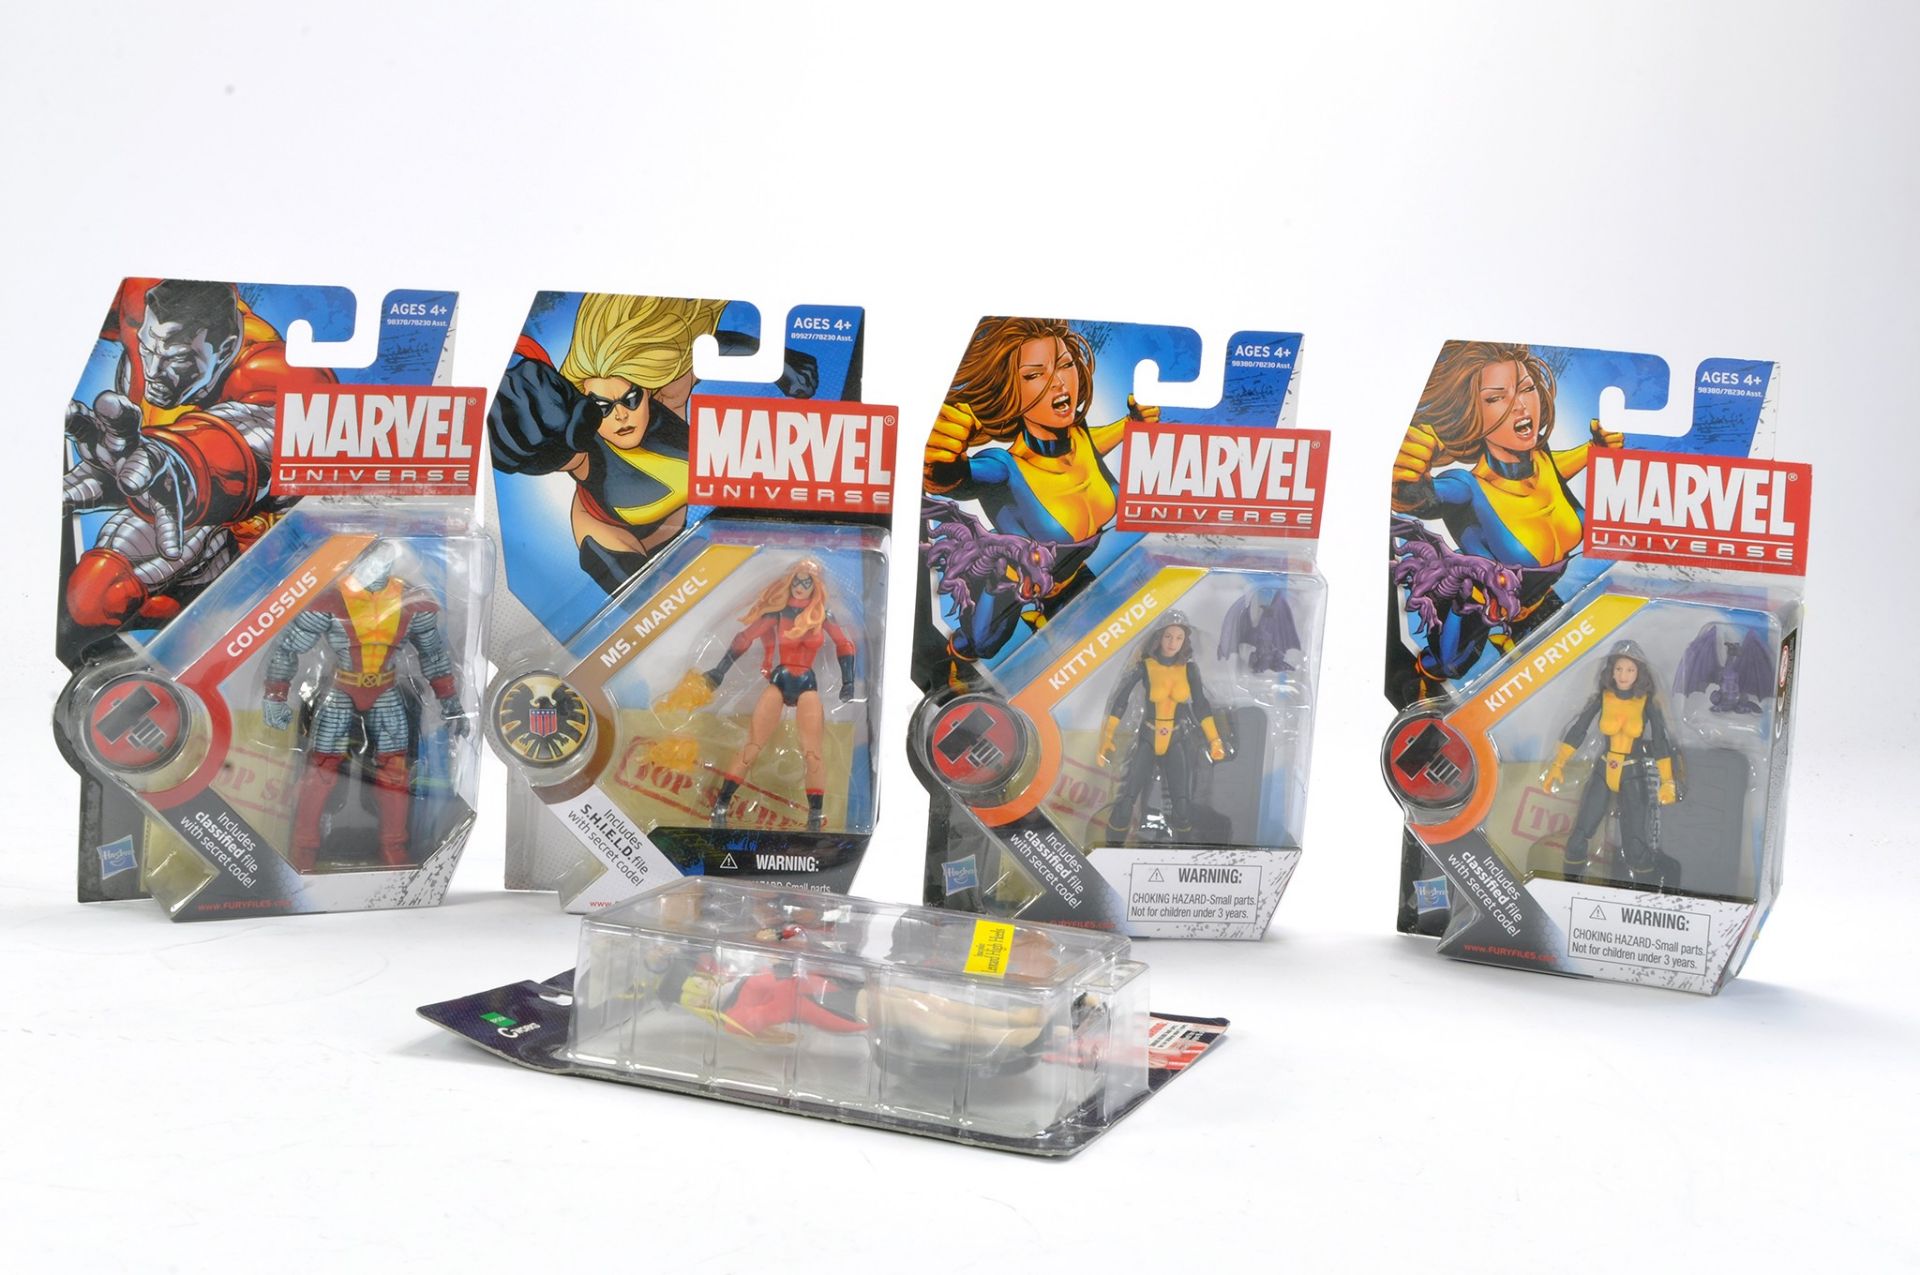 Epoch C Works G-Taste Anime Figure plus trio of Hasbro Marvel Universe issues. All excellent,